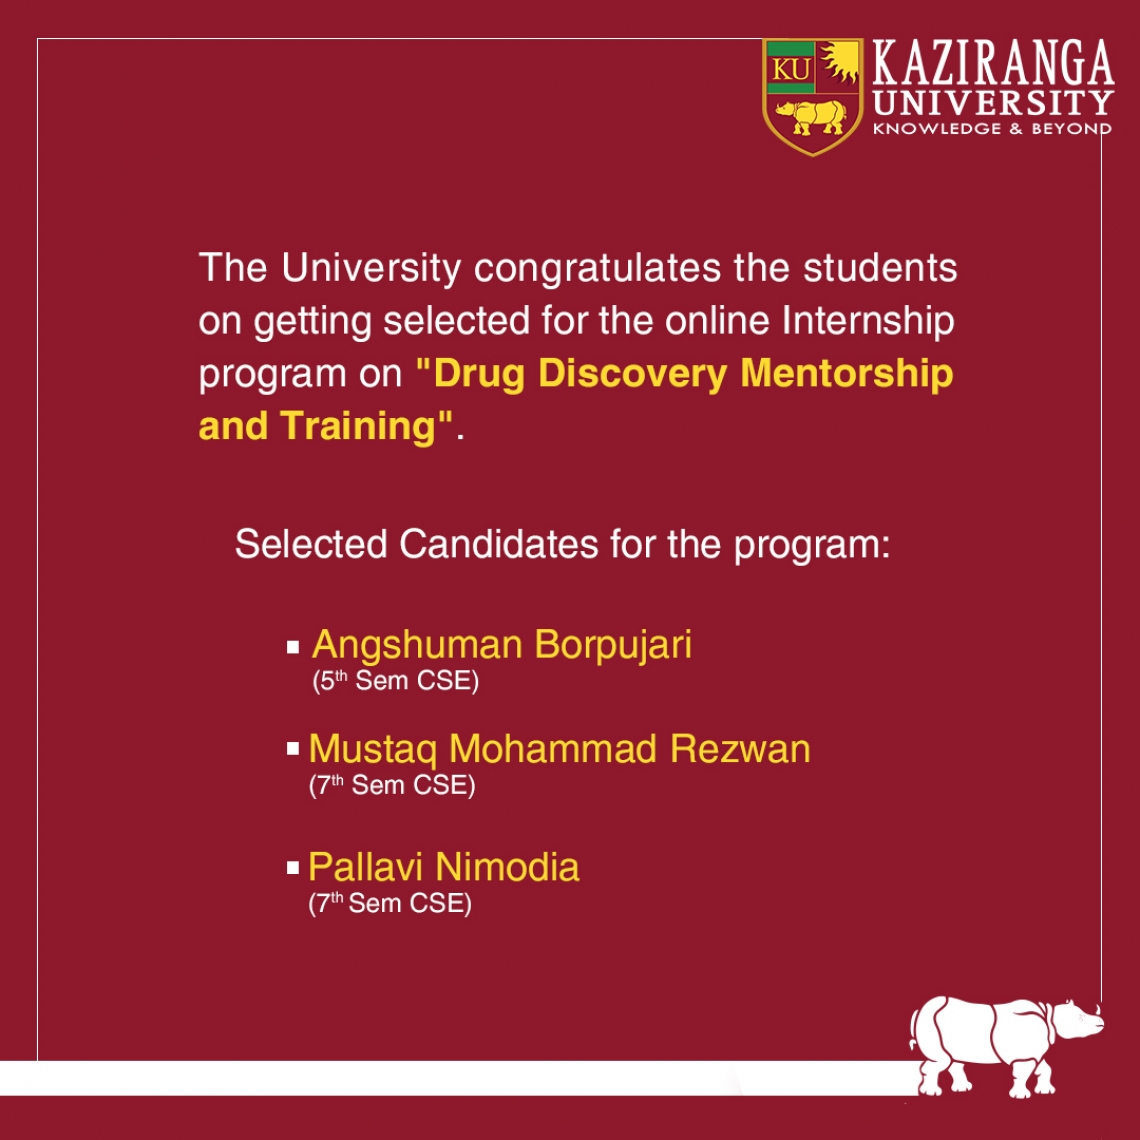 Congratulations on the selection for the Online Internship program on "Drug Discovery Mentorship and Training".